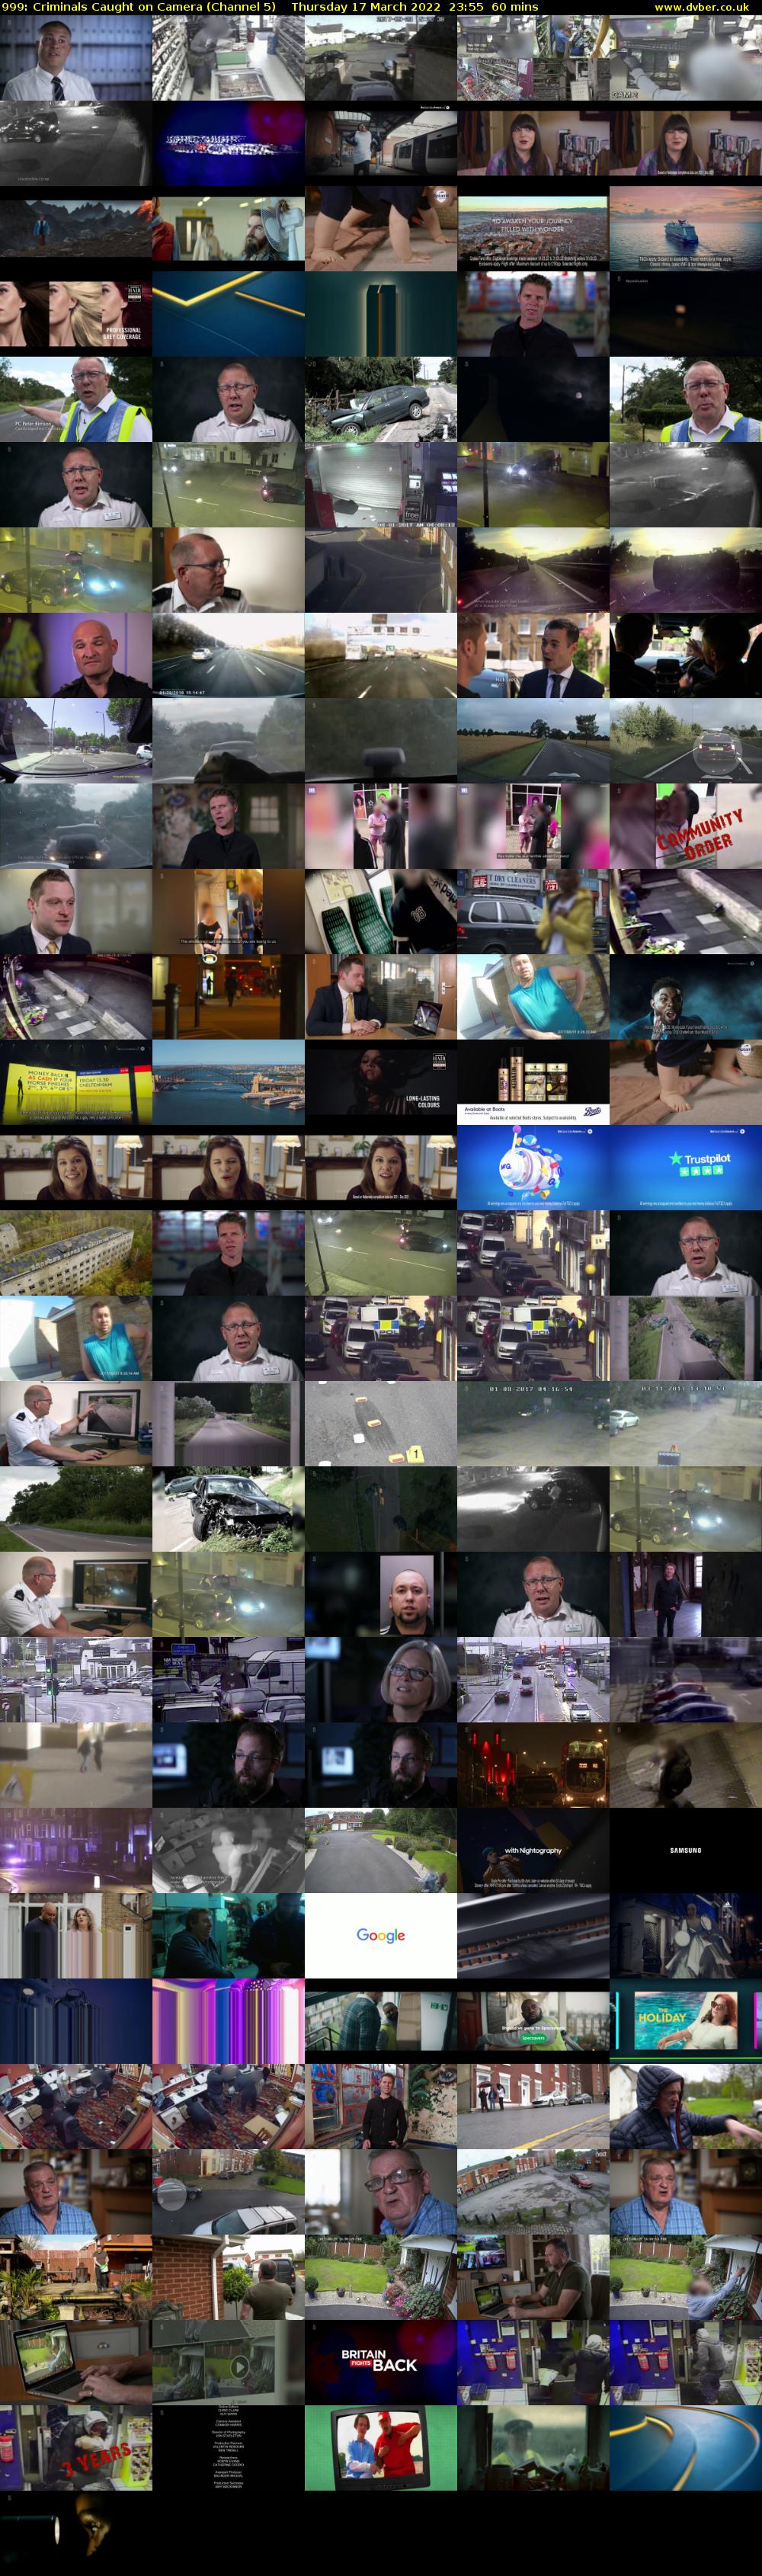 999: Criminals Caught on Camera (Channel 5) Thursday 17 March 2022 23:55 - 00:55